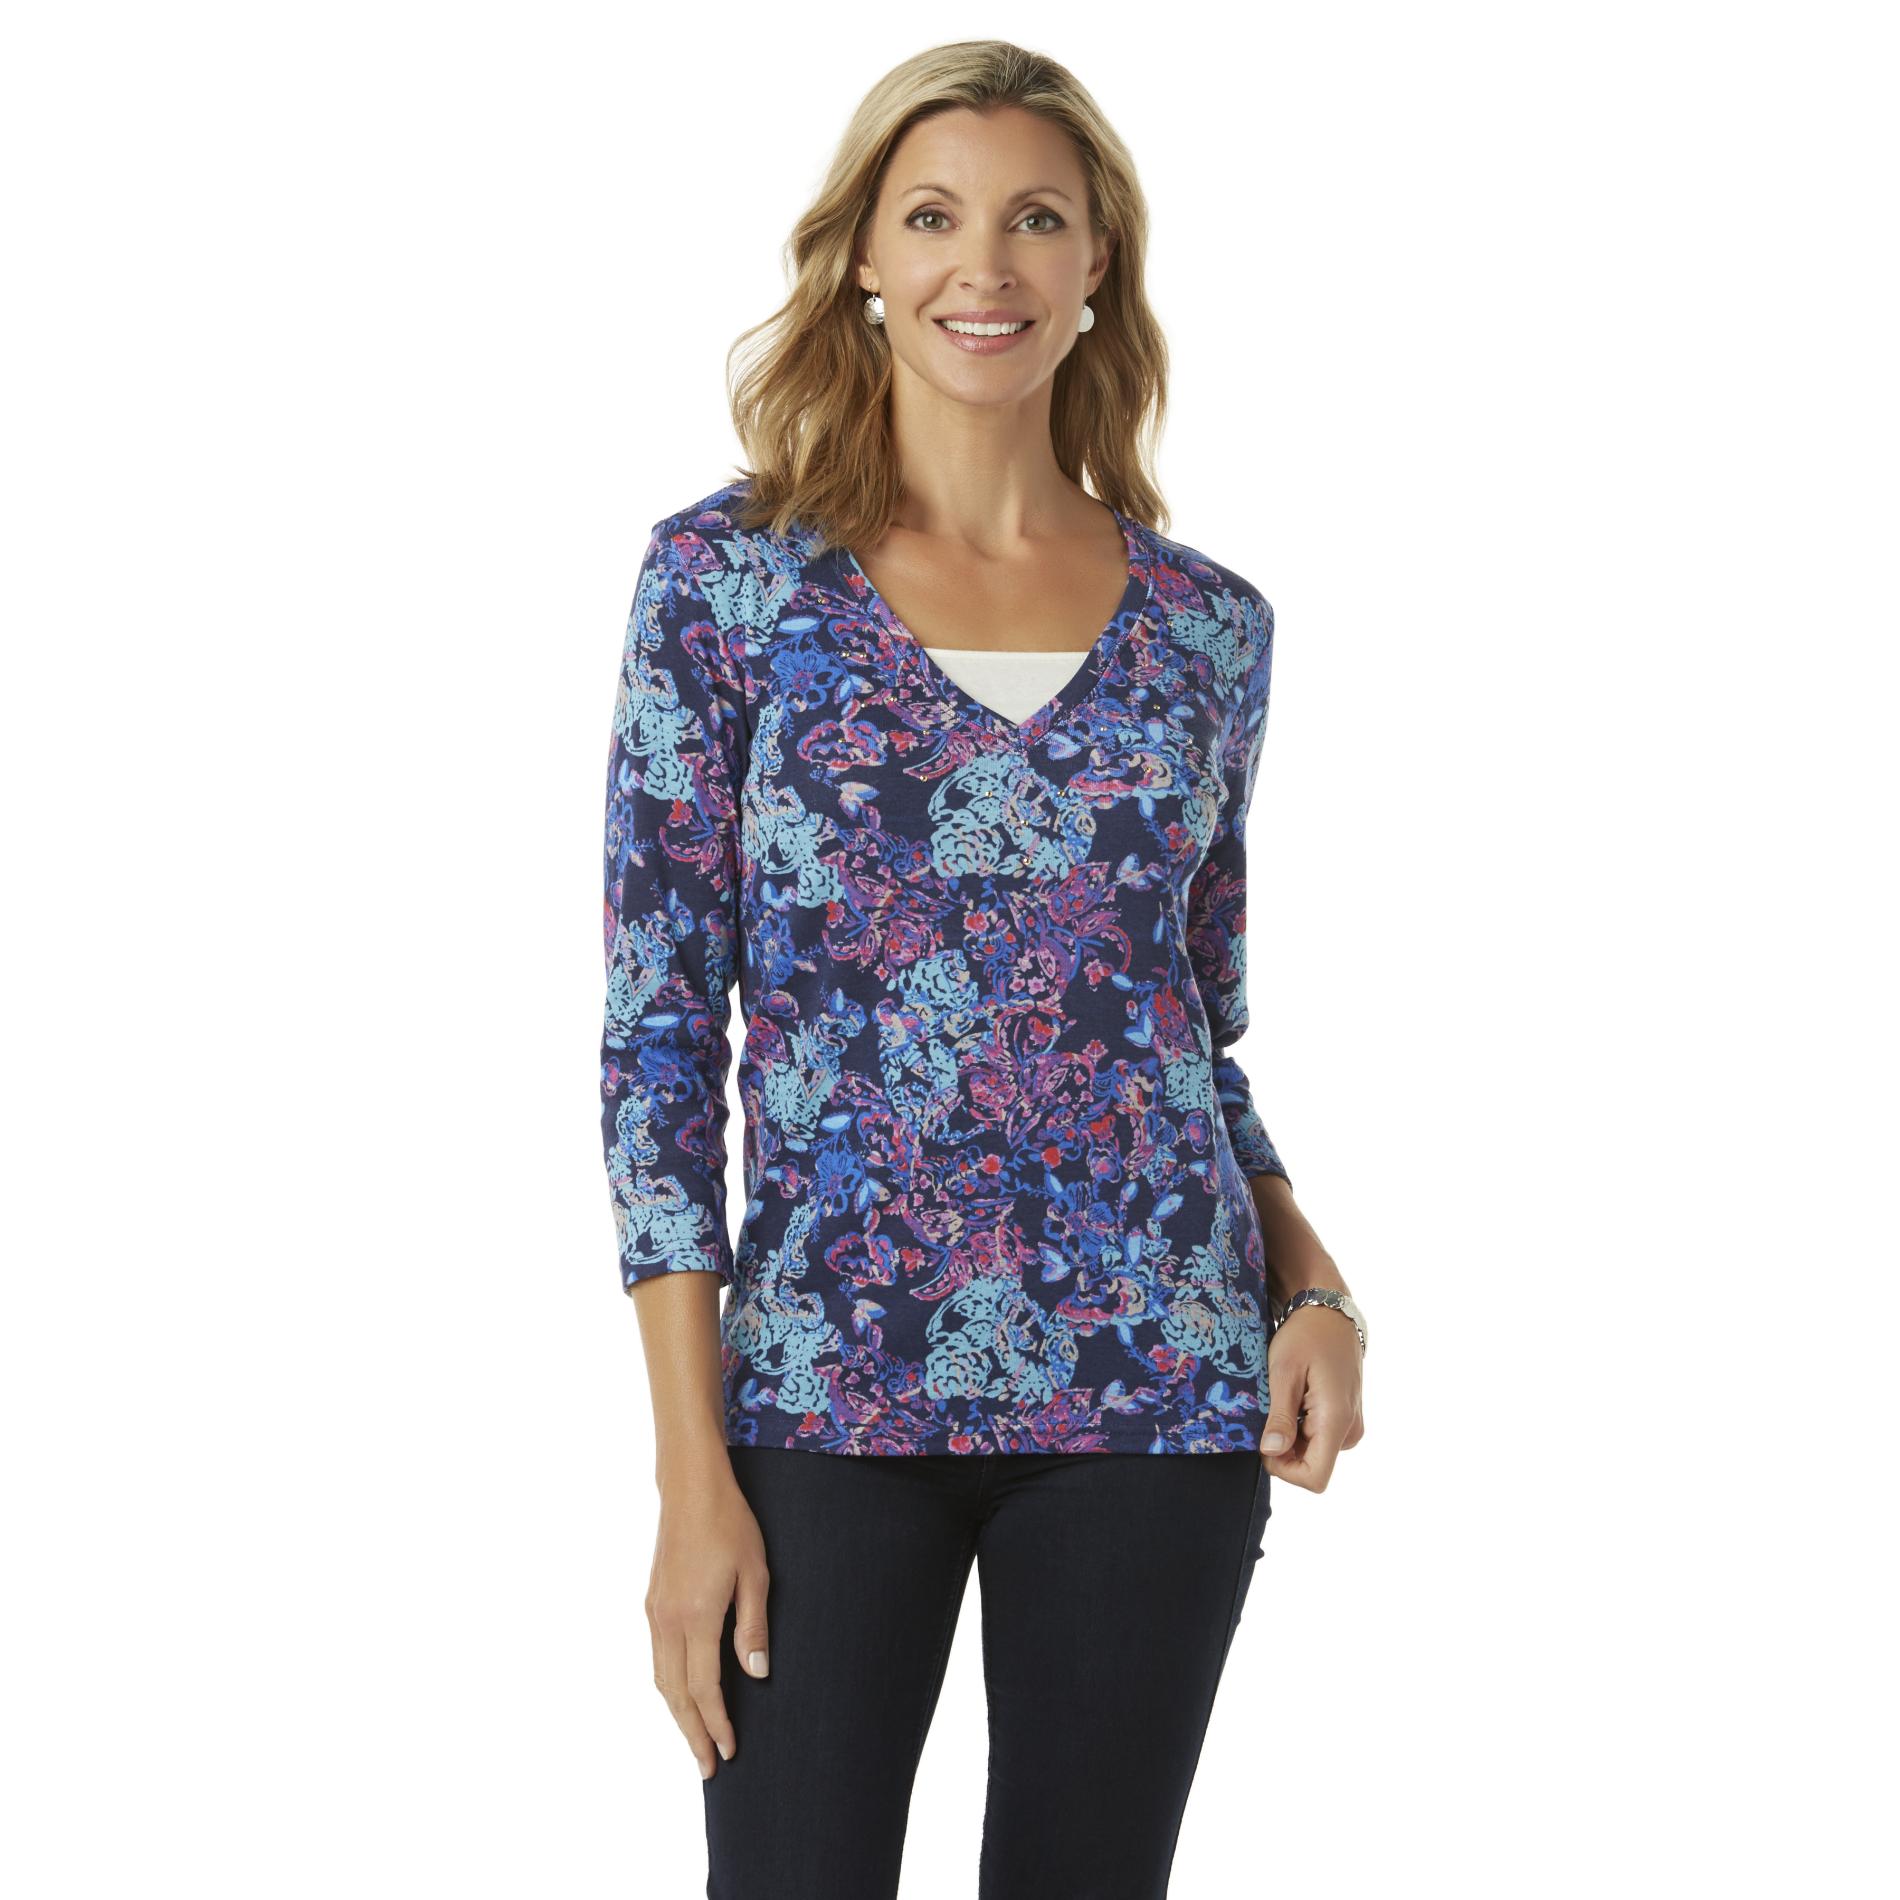 Basic Editions Women's Embellished Layered-Look Top - Floral